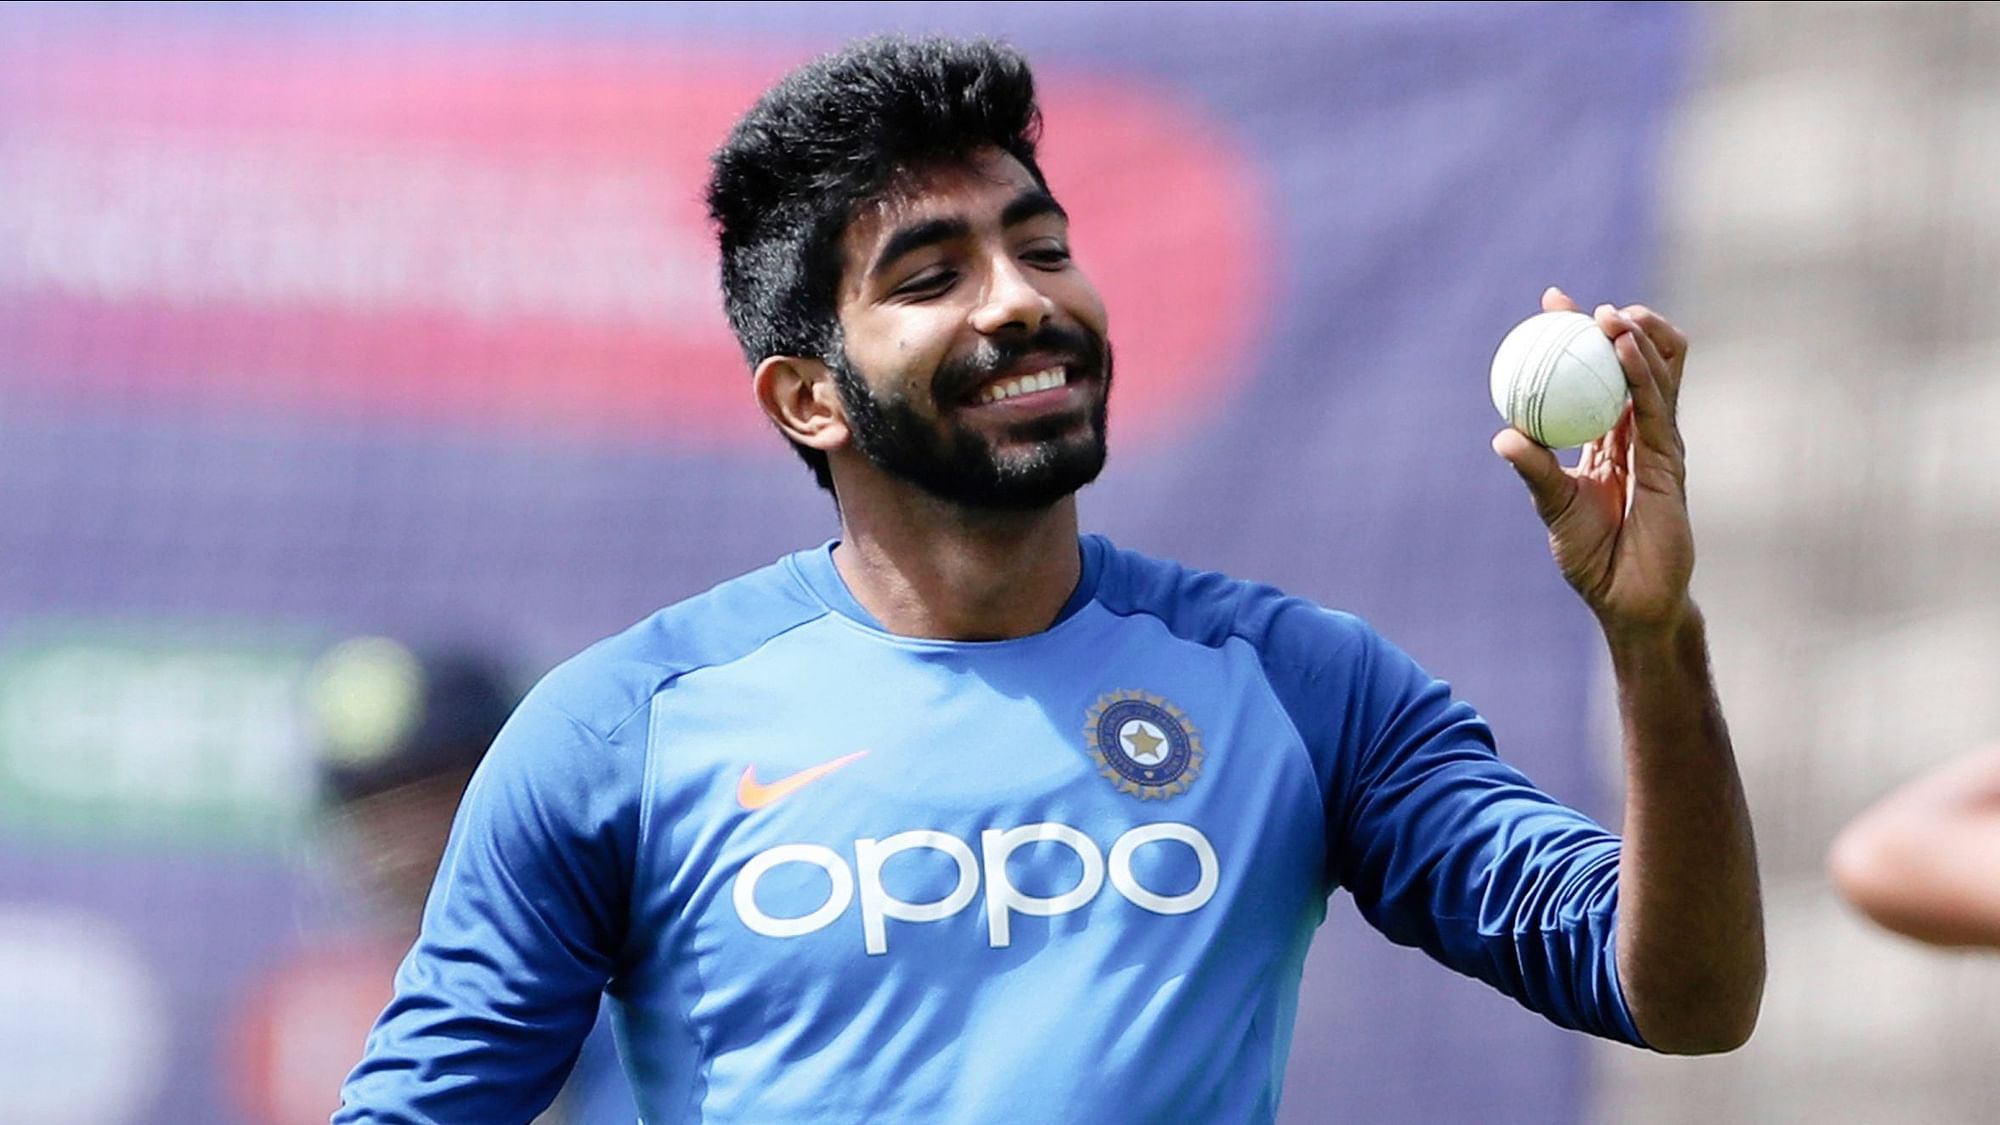 He may not like to admit it, but Jasprit Bumrah has spent a better part of his three-year international career proving critics wrong.